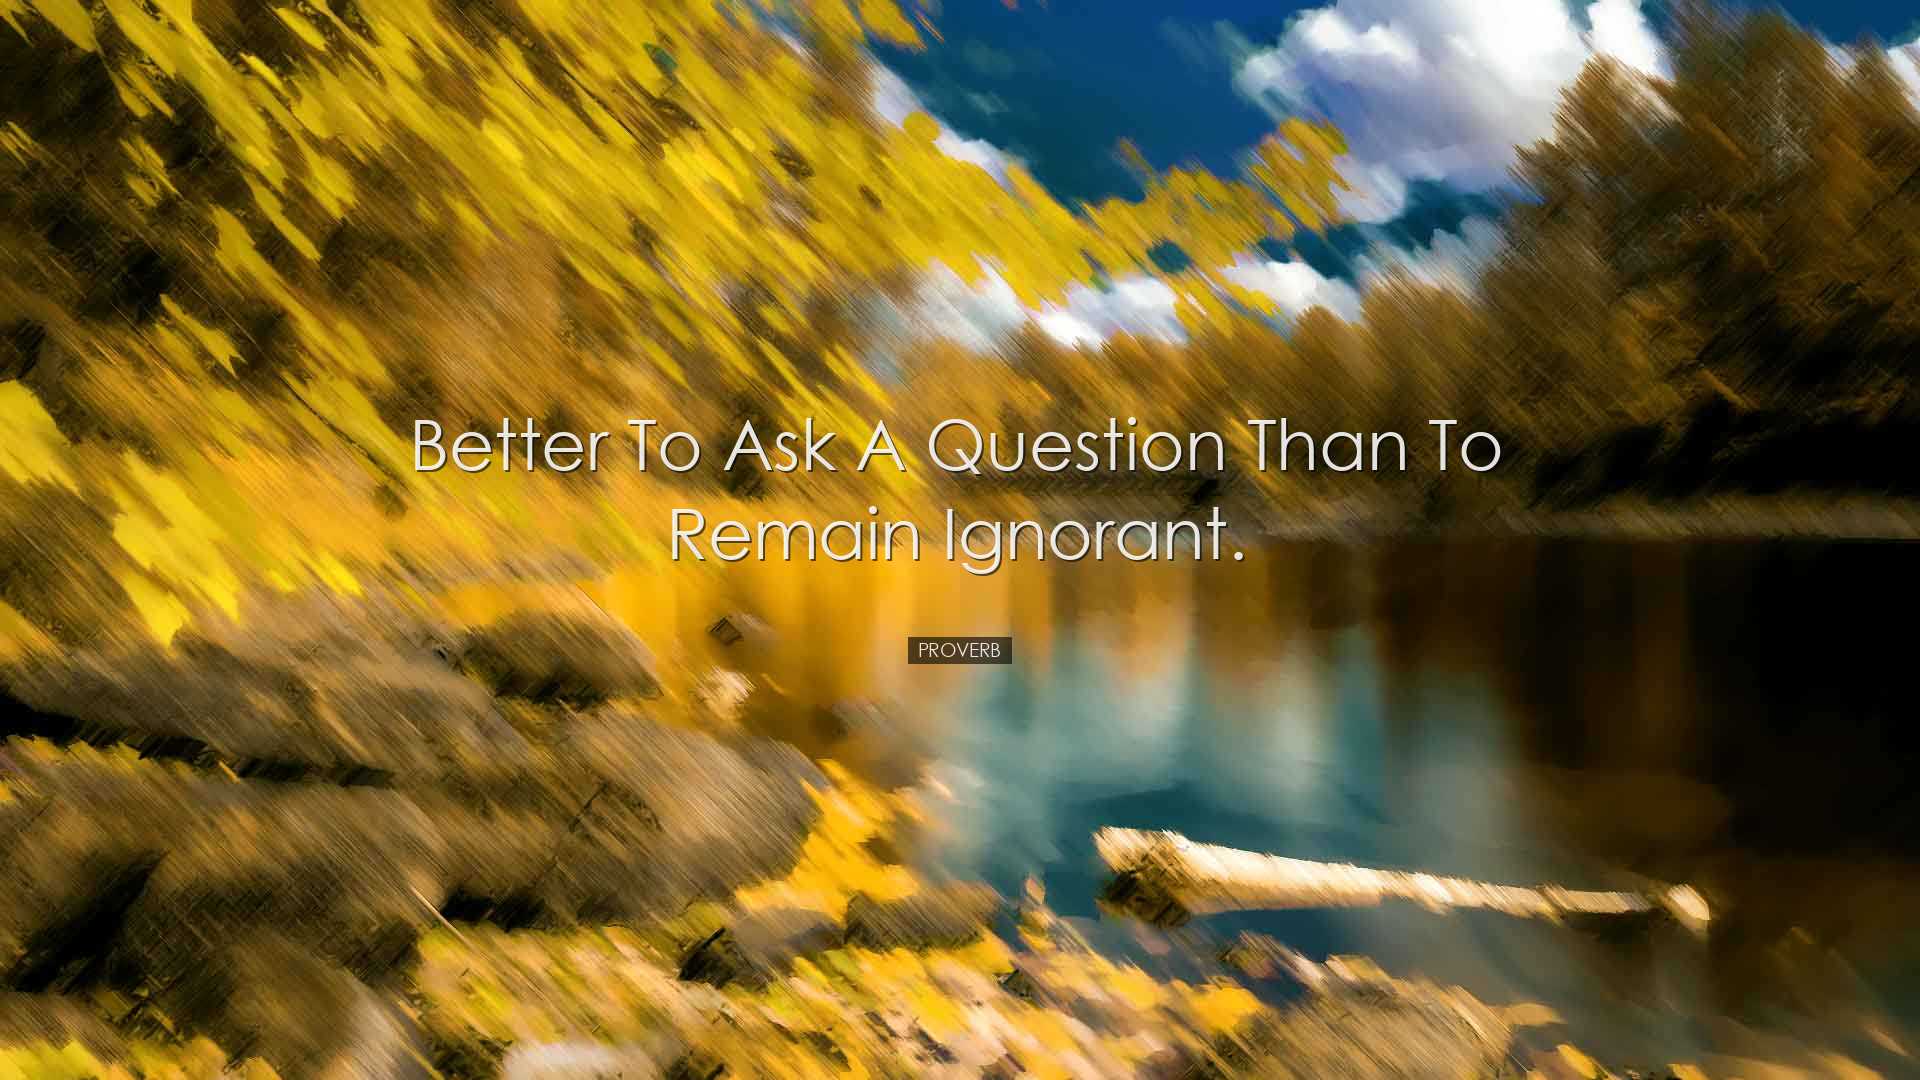 Better to ask a question than to remain ignorant. - Proverb